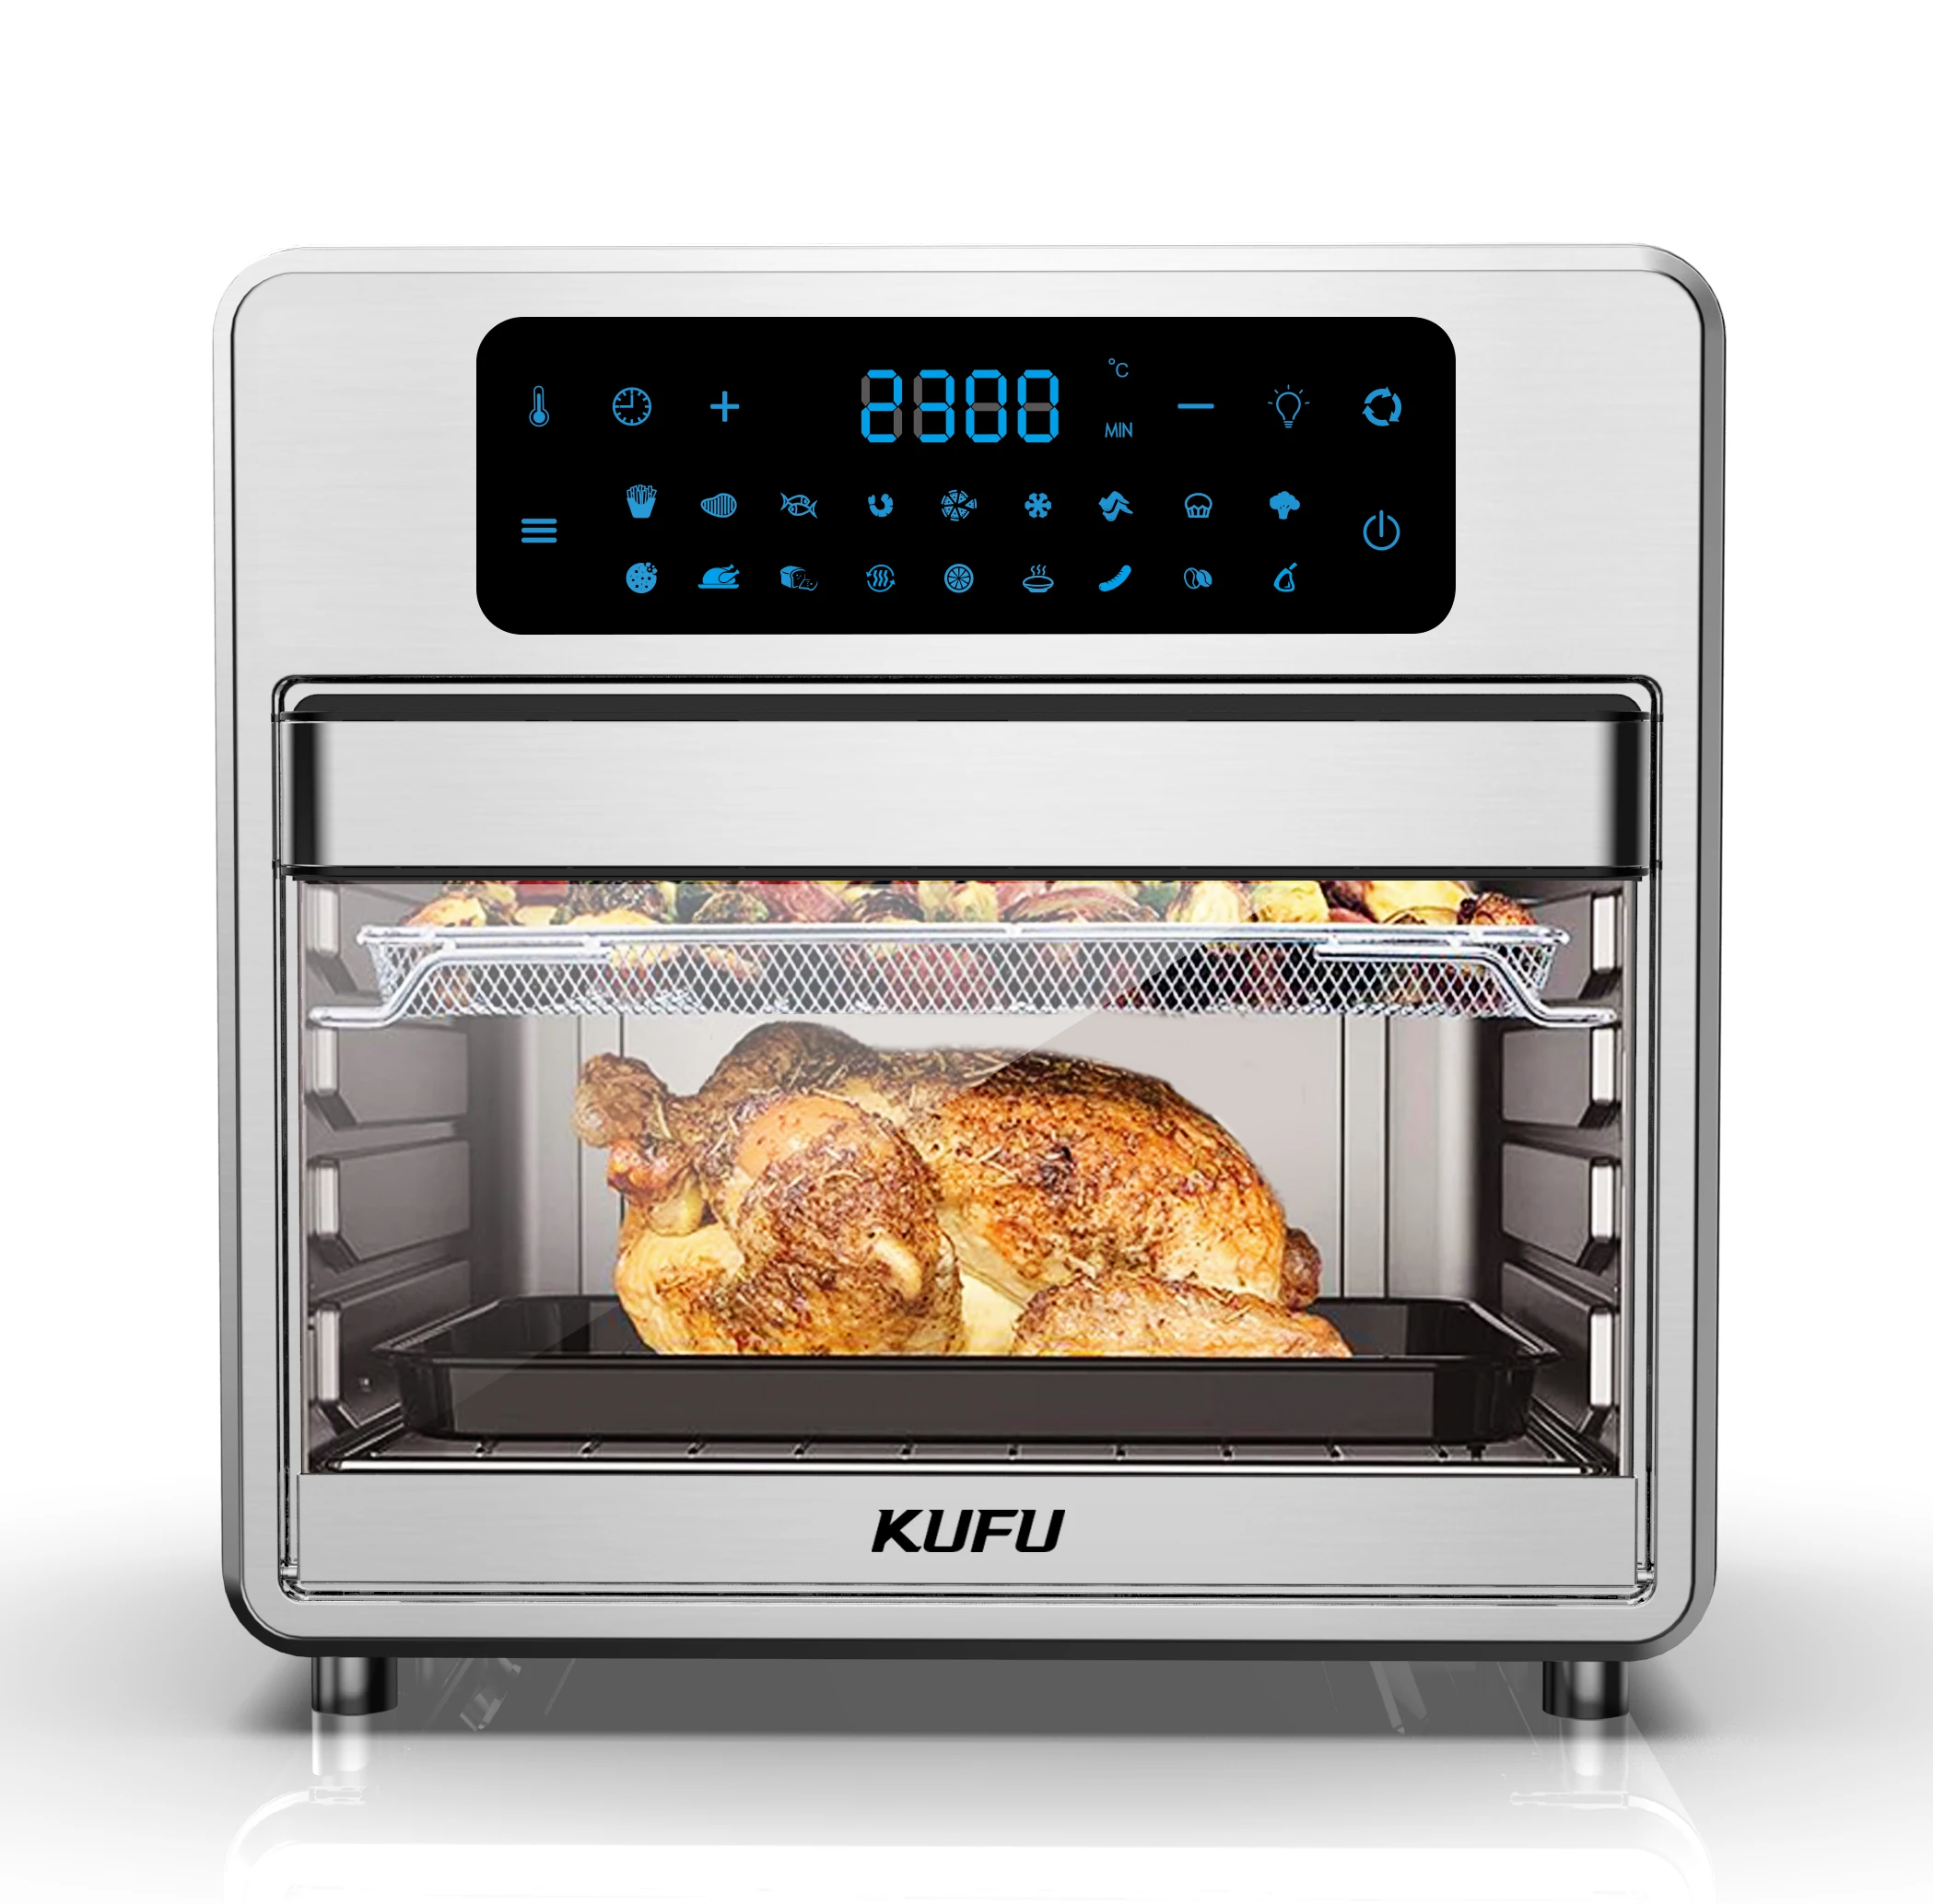 Shiren 15L Liter 1500W Factory Price Healthy Digital Air Fryer The Power 360  Manual   Oven hot sale multi electric air fryers 1400w high power smart oil free commercial turkey roaster 15l no oil steam air fryer oven